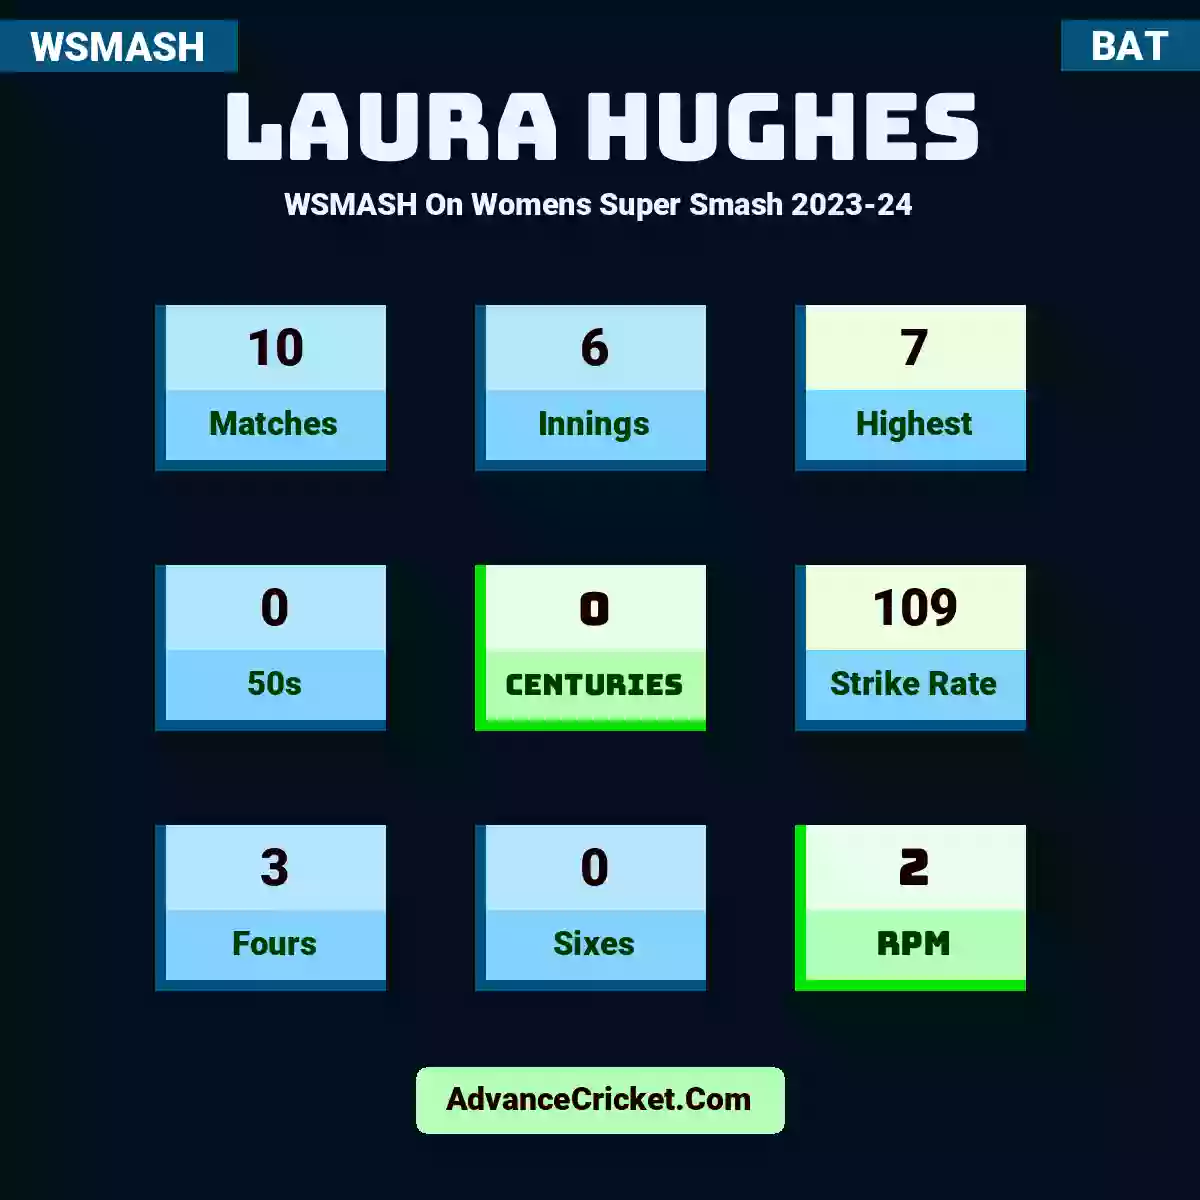 Laura Hughes WSMASH  On Womens Super Smash 2023-24, Laura Hughes played 10 matches, scored 7 runs as highest, 0 half-centuries, and 0 centuries, with a strike rate of 109. L.Hughes hit 3 fours and 0 sixes, with an RPM of 2.